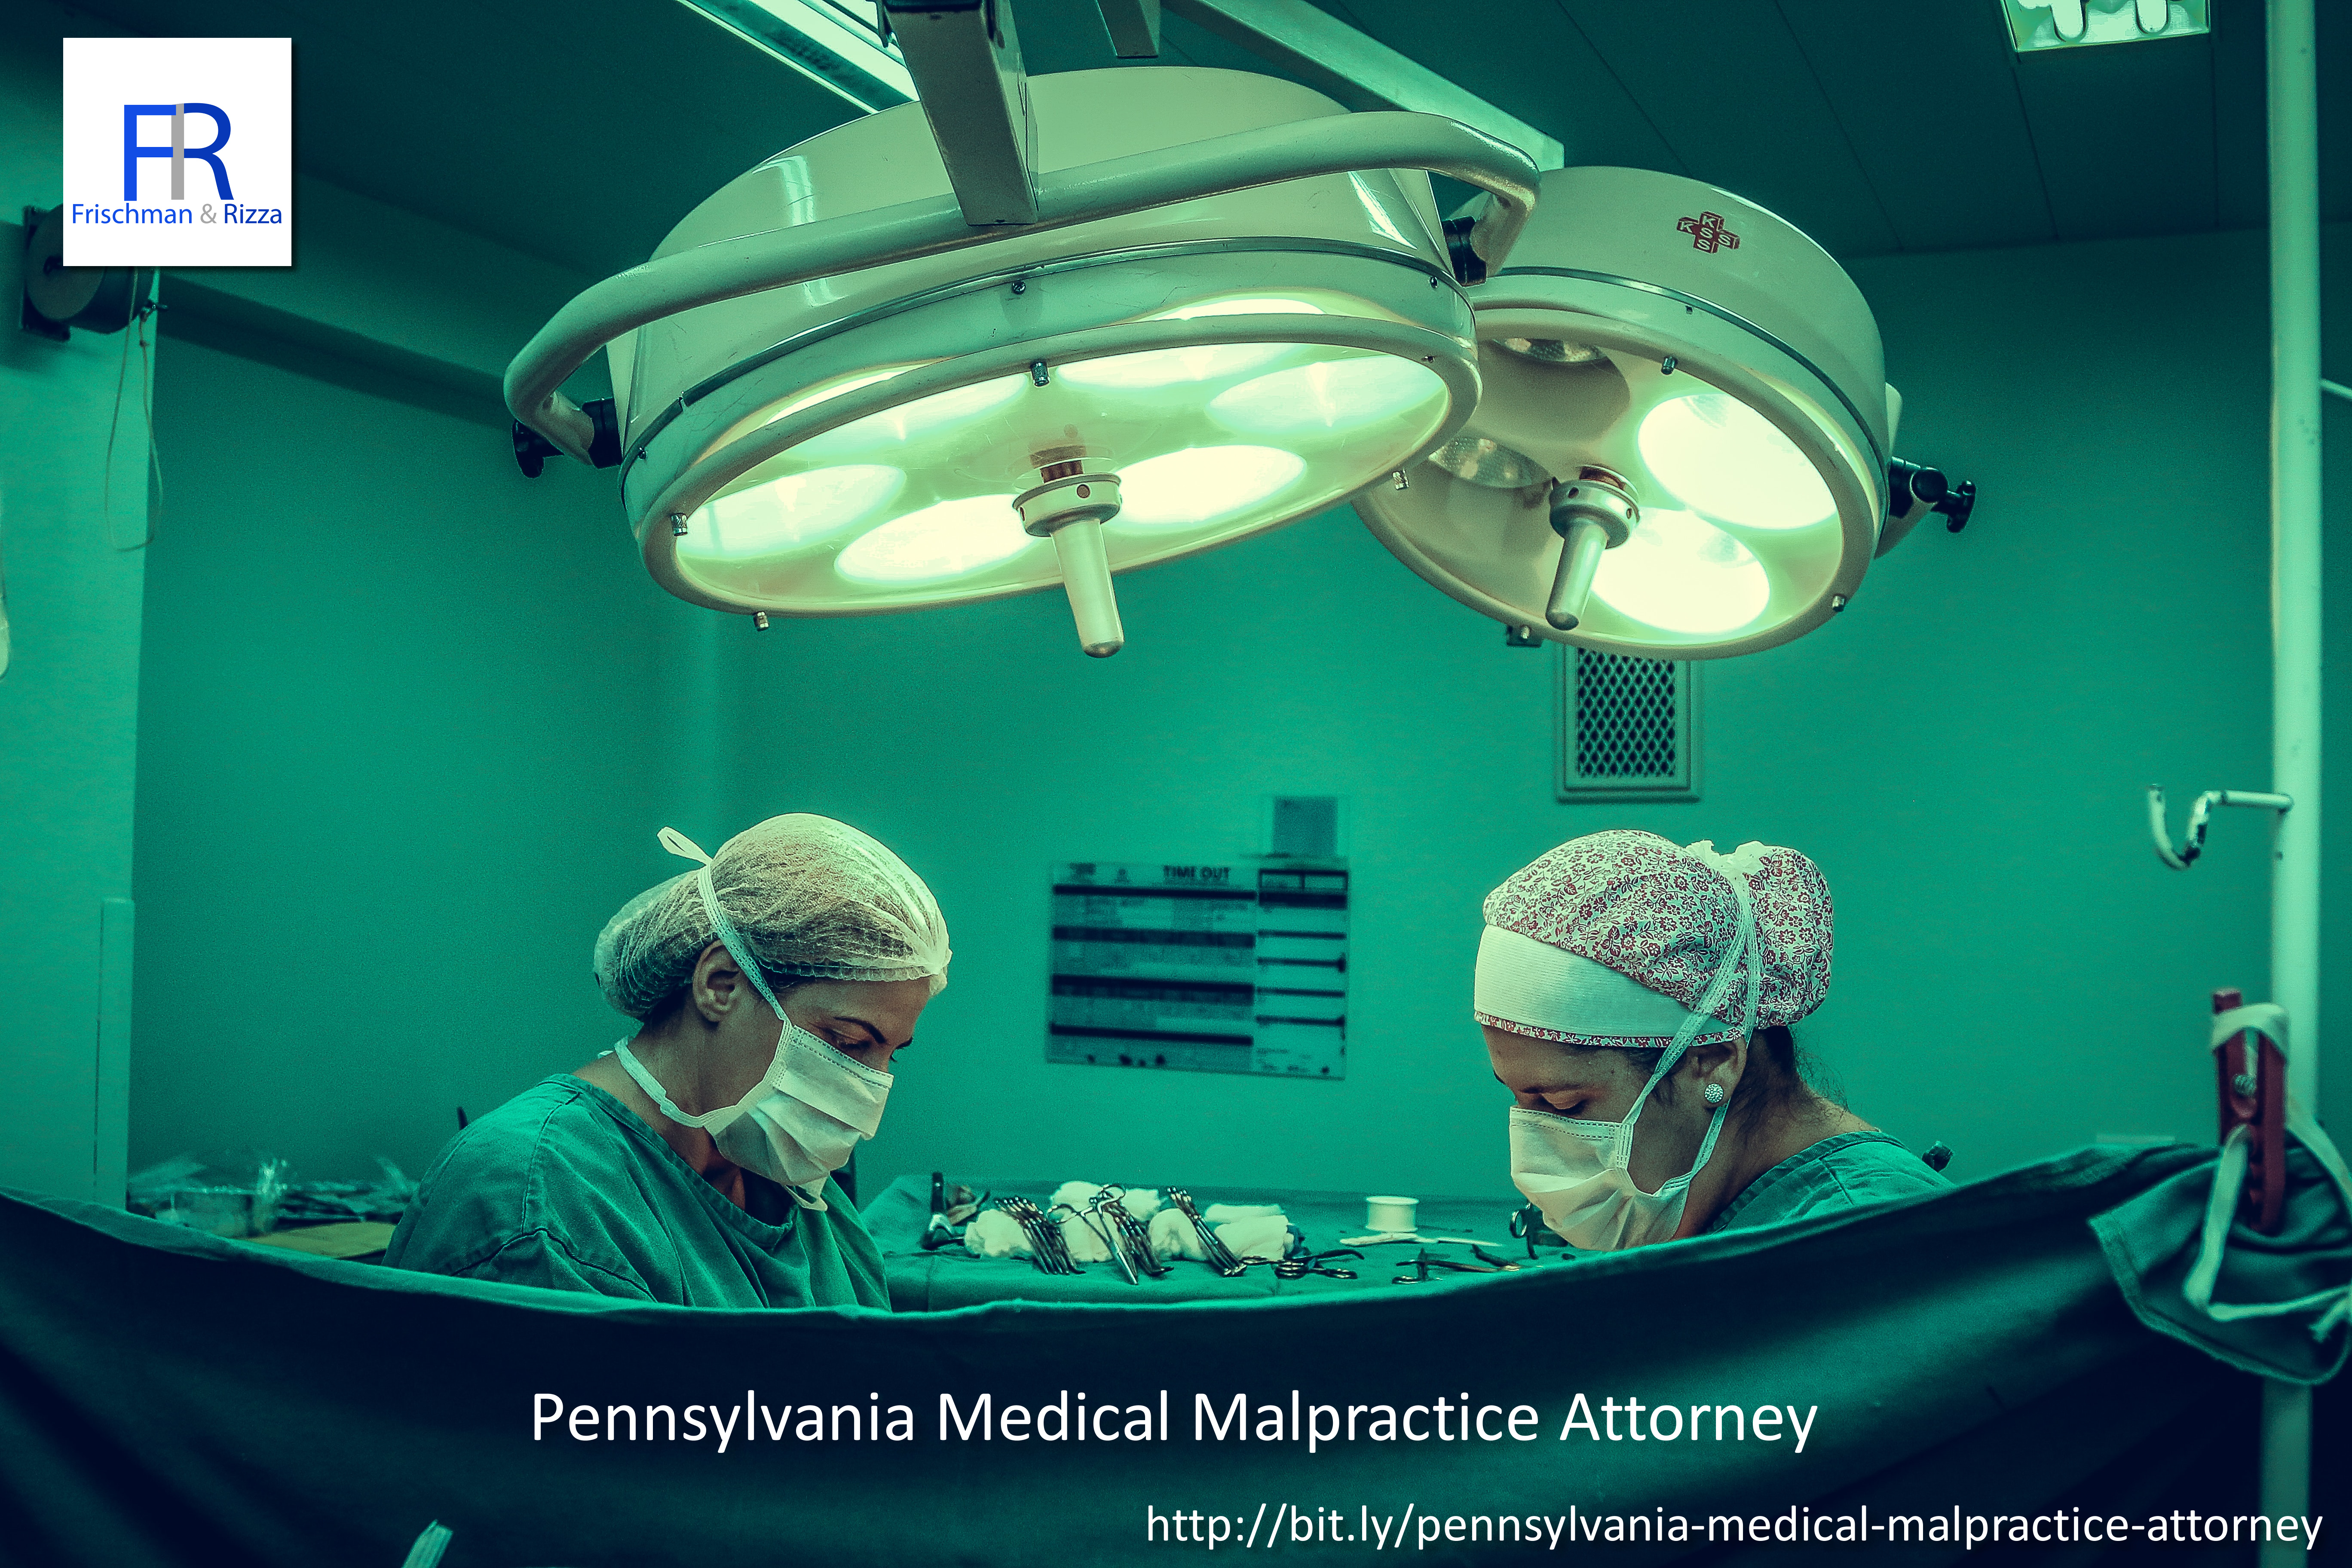 About Frischman & Rizza P.C. Cautions on How to Choose a Medical Malpractice Lawyer